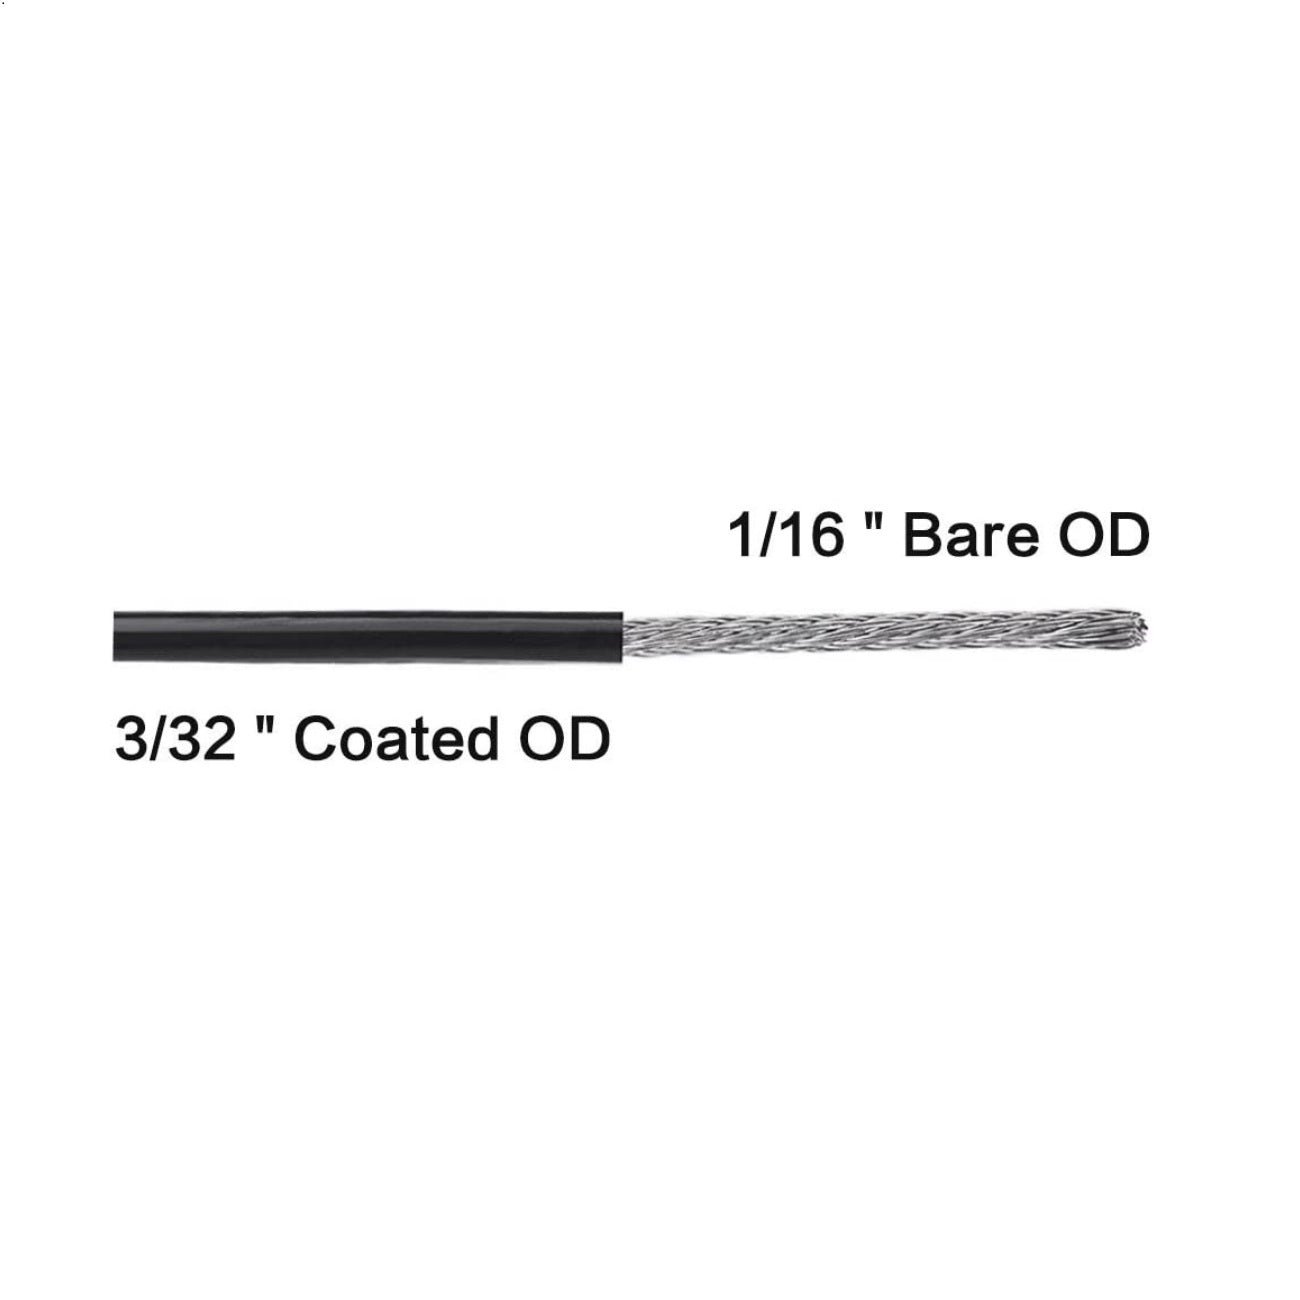 500 lb Vinyl Coated Stainless Steel 7x7 Strand Leader Cable 20ft